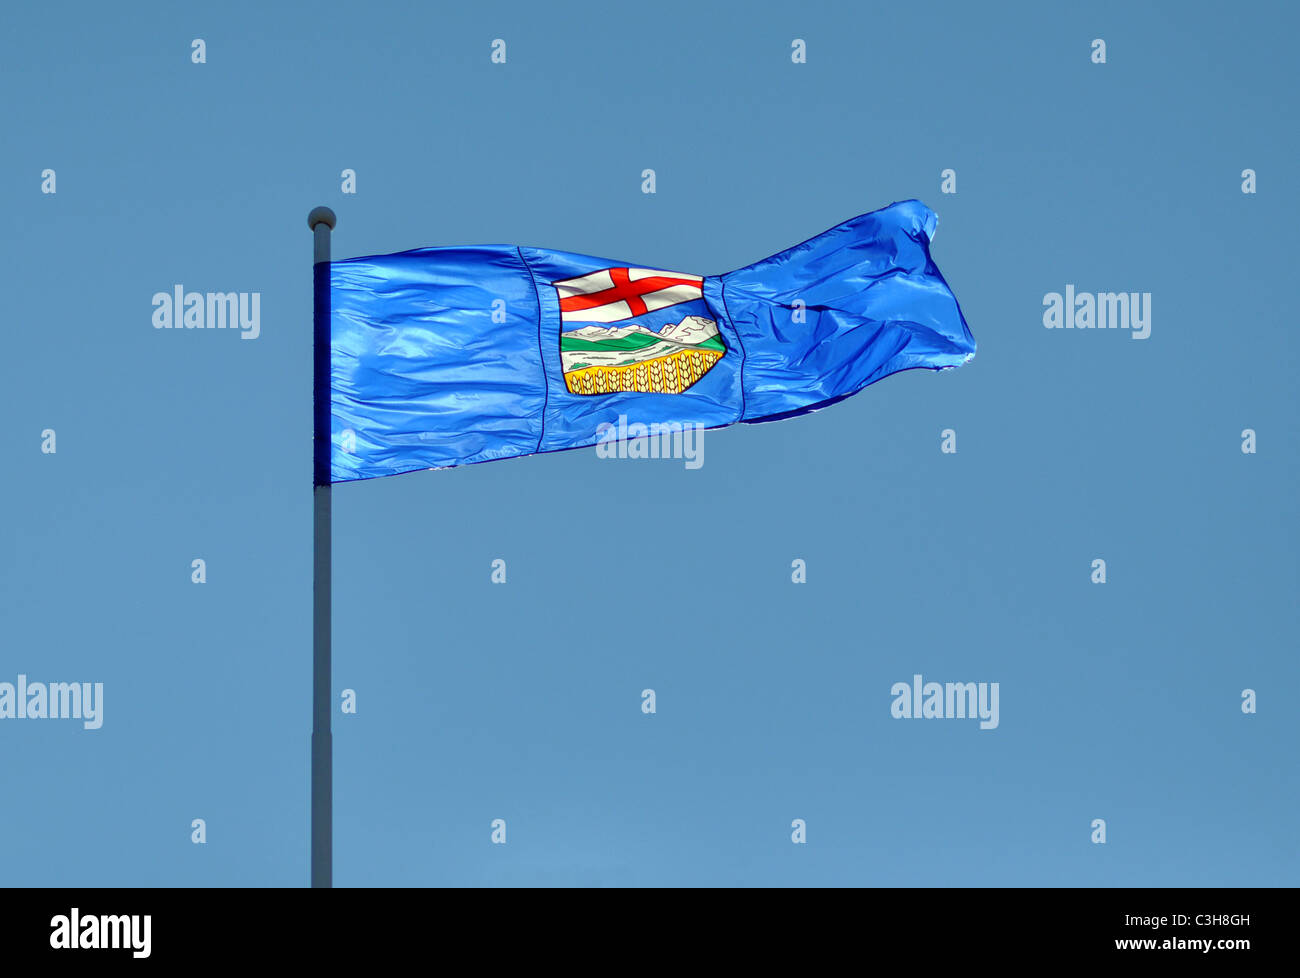 Provincial Flag for Alberta, Canada blowing in the wind illuminated by sunlight. Stock Photo